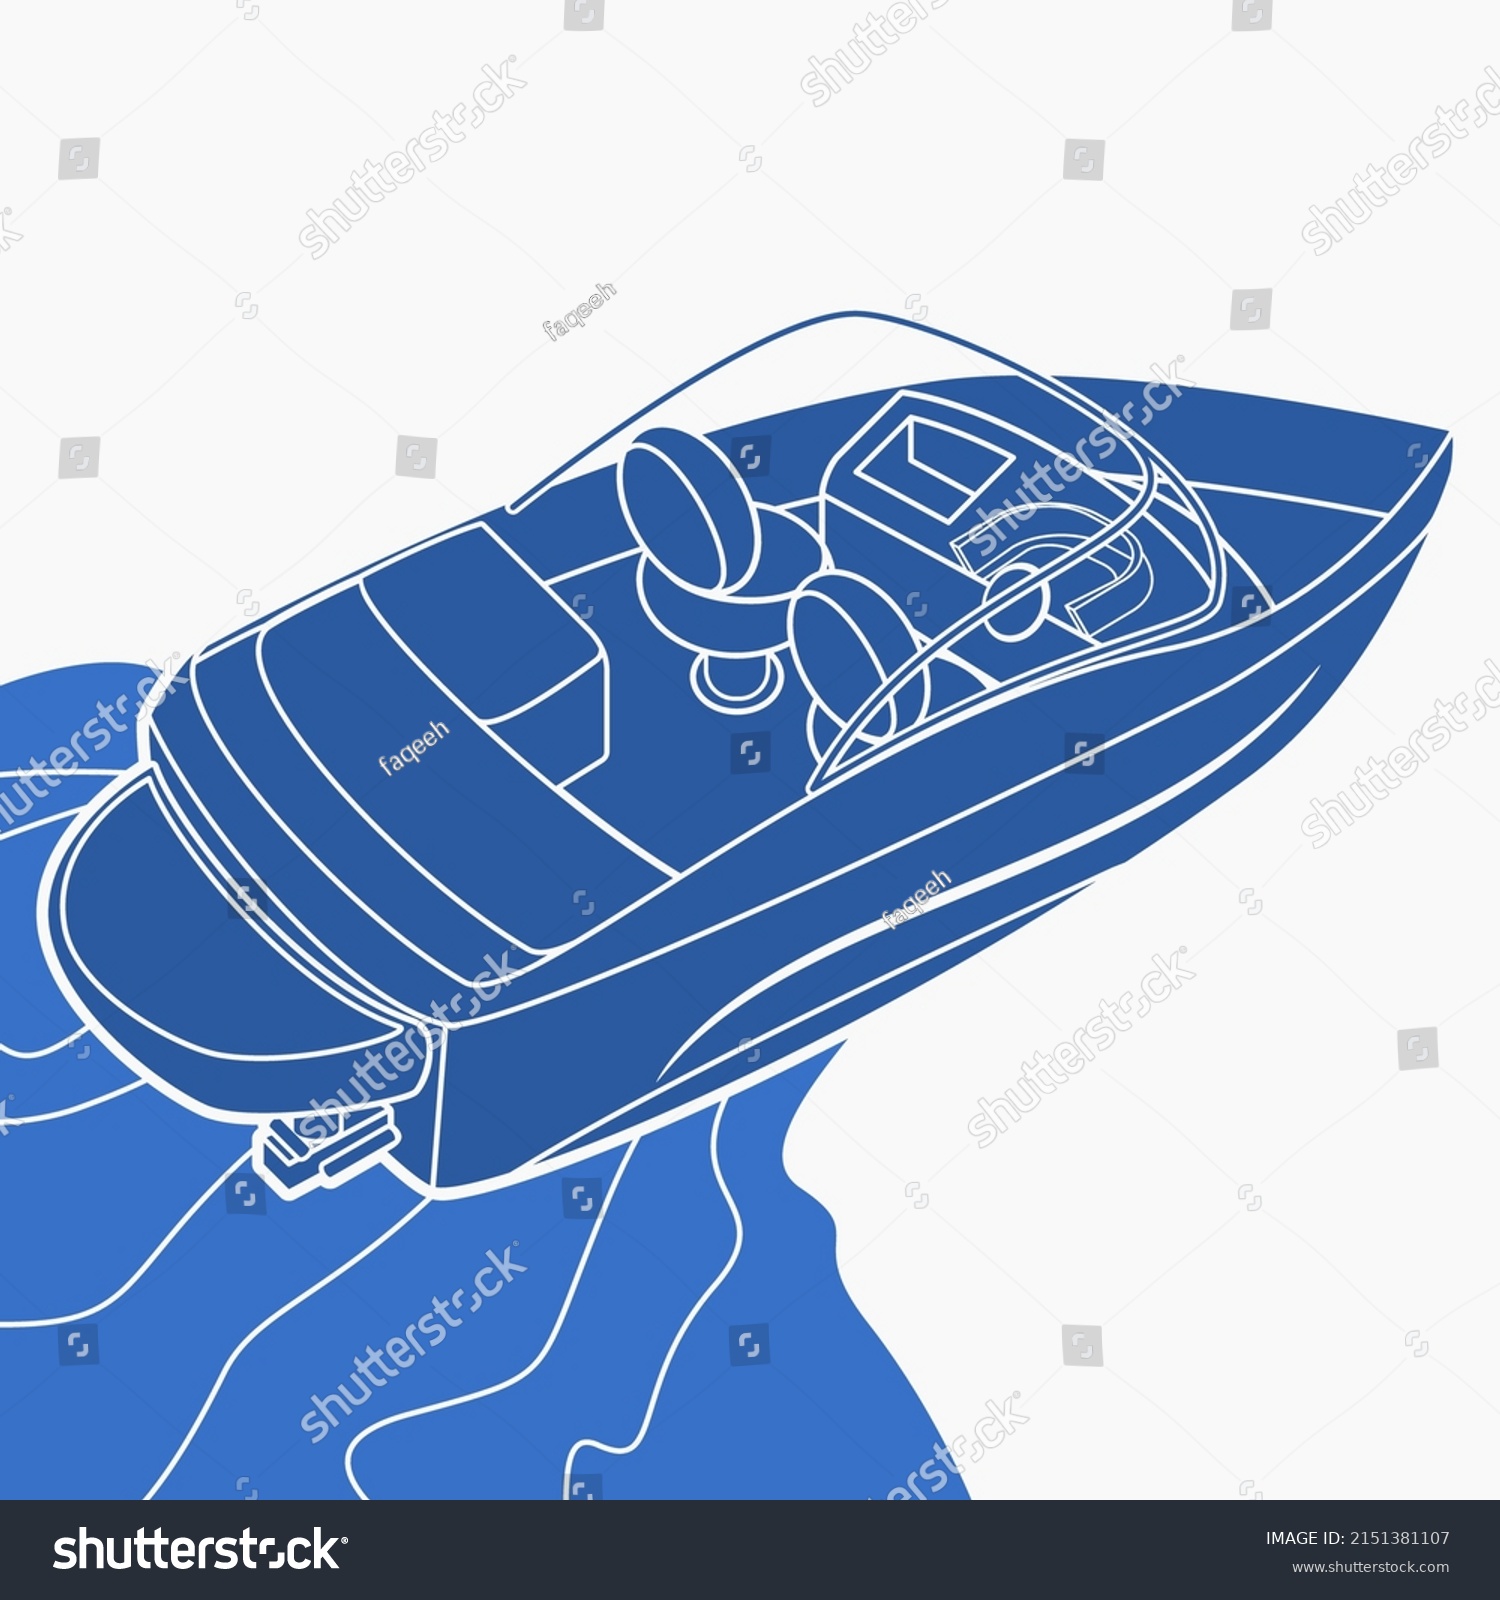 SVG of Editable Top Back Oblique View American Bowrider Boat on Water Vector Illustration in Monochrome Style for Artwork Element of Transportation or Recreation Related Design svg